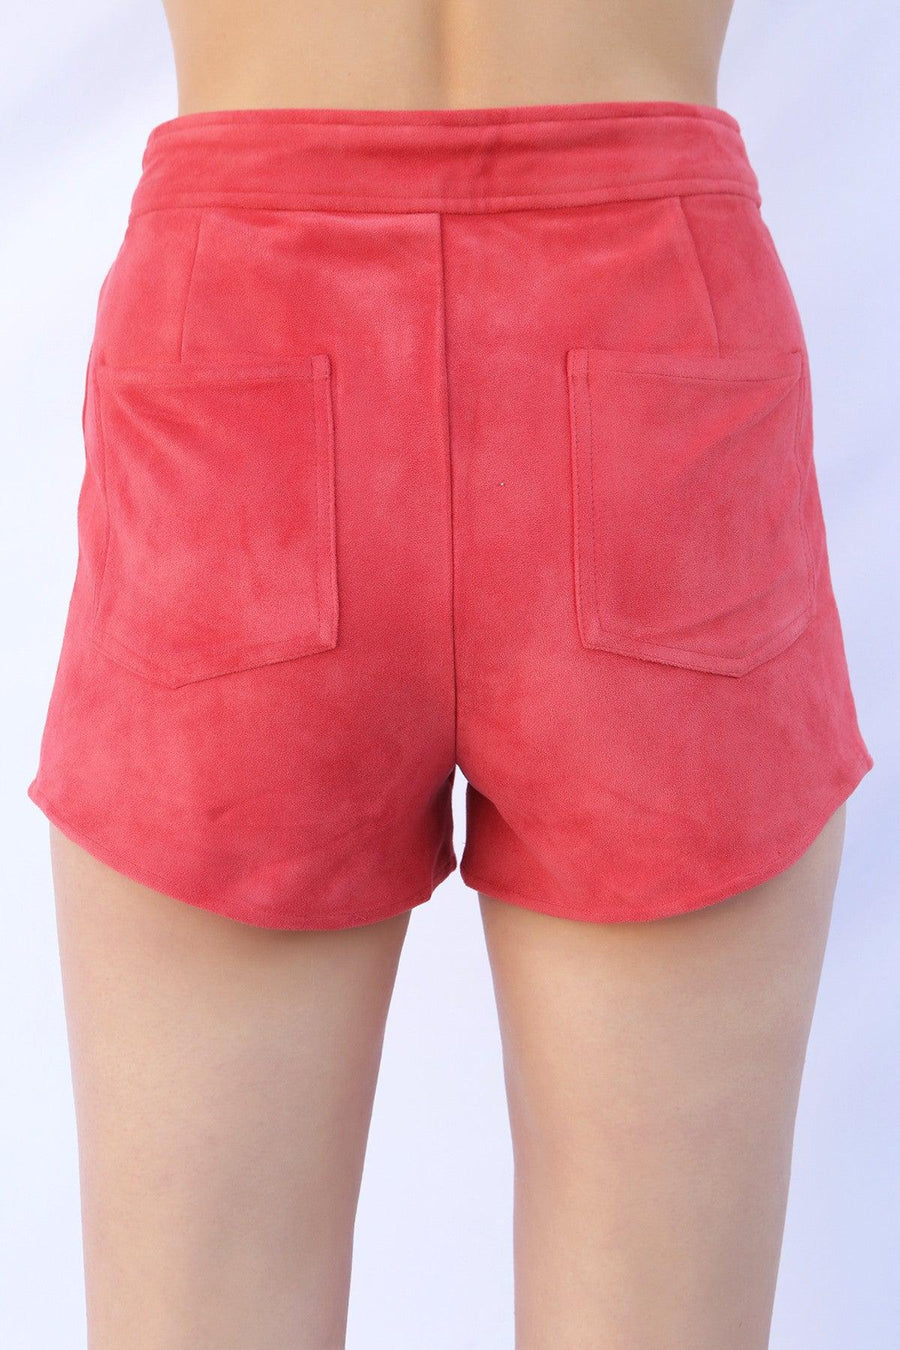 Tied Up Lace Front Shorts by Minkpink - FINAL SALE - SHOPLUNAB